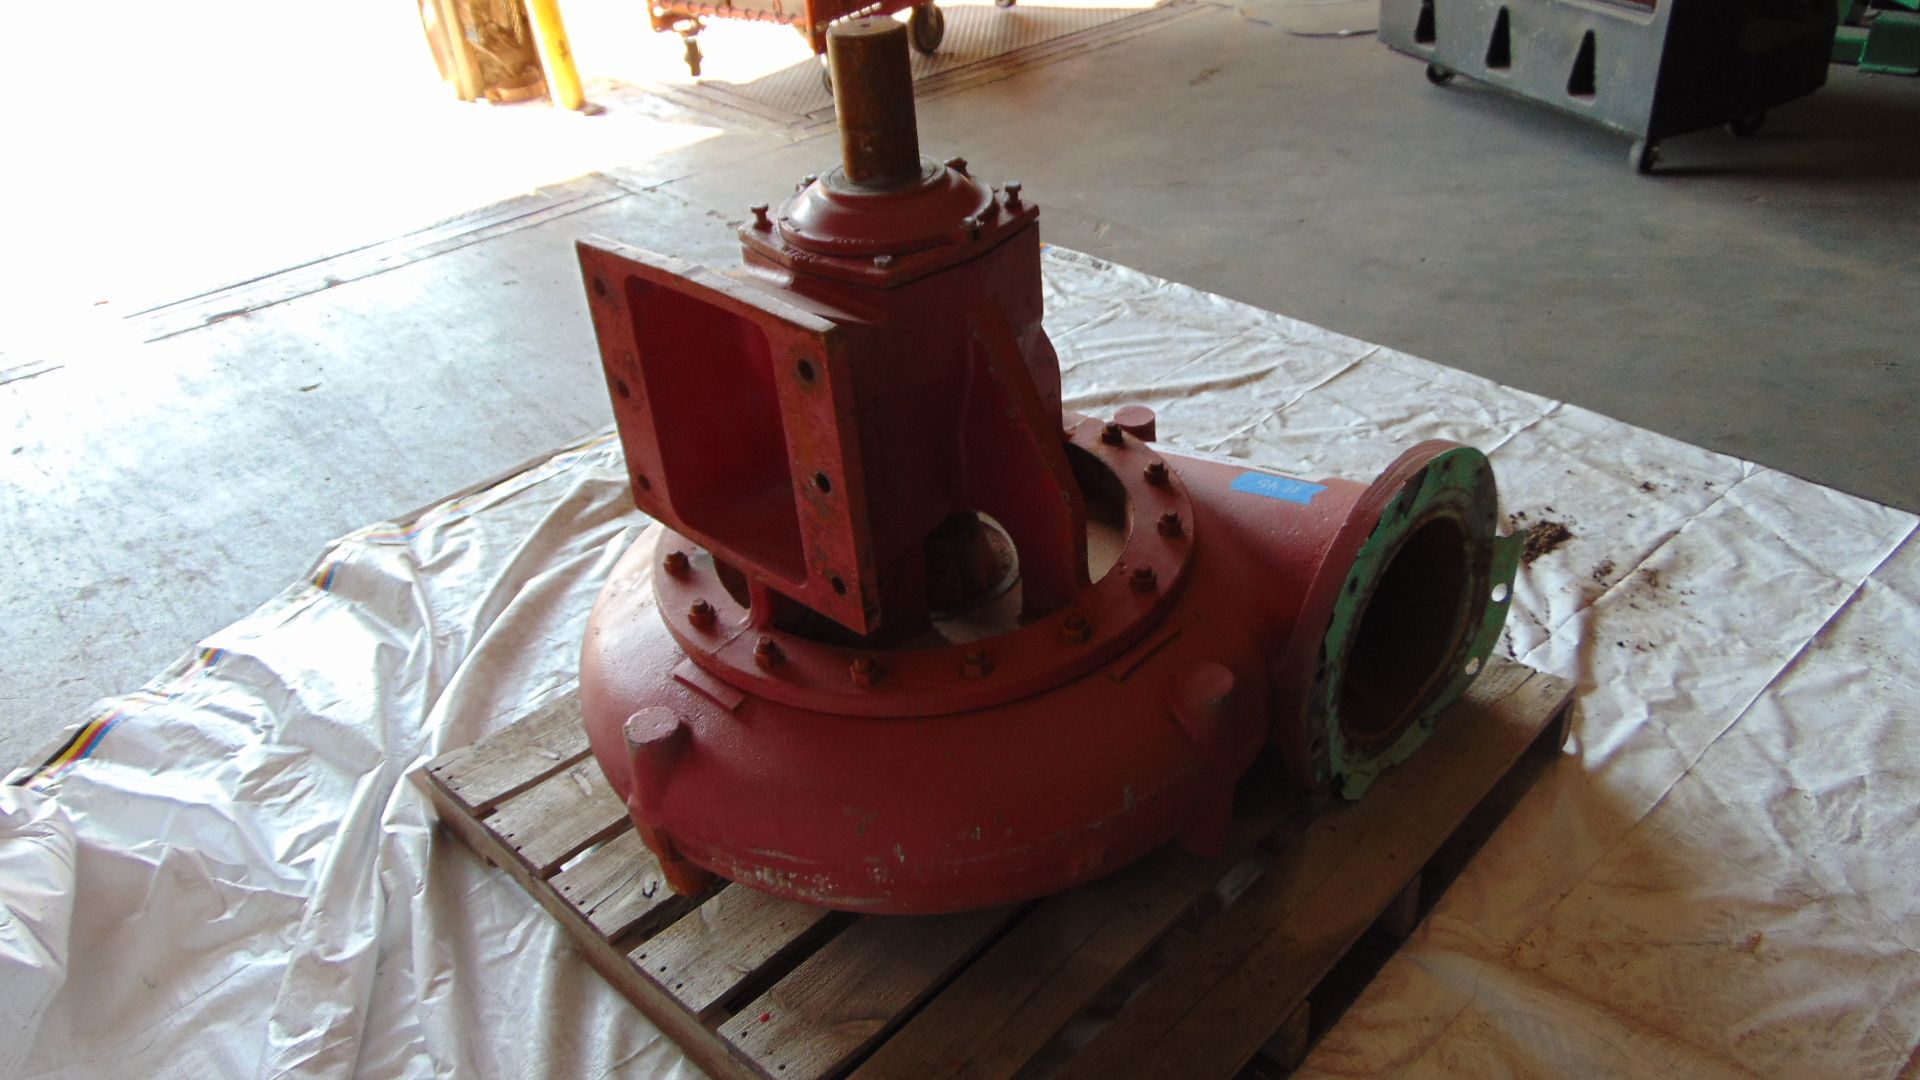 Centrifugal Pump Nov Mission 4"x12"-Centrifugal-1,986lbs Location: Forest Hills, Texas - Image 20 of 28